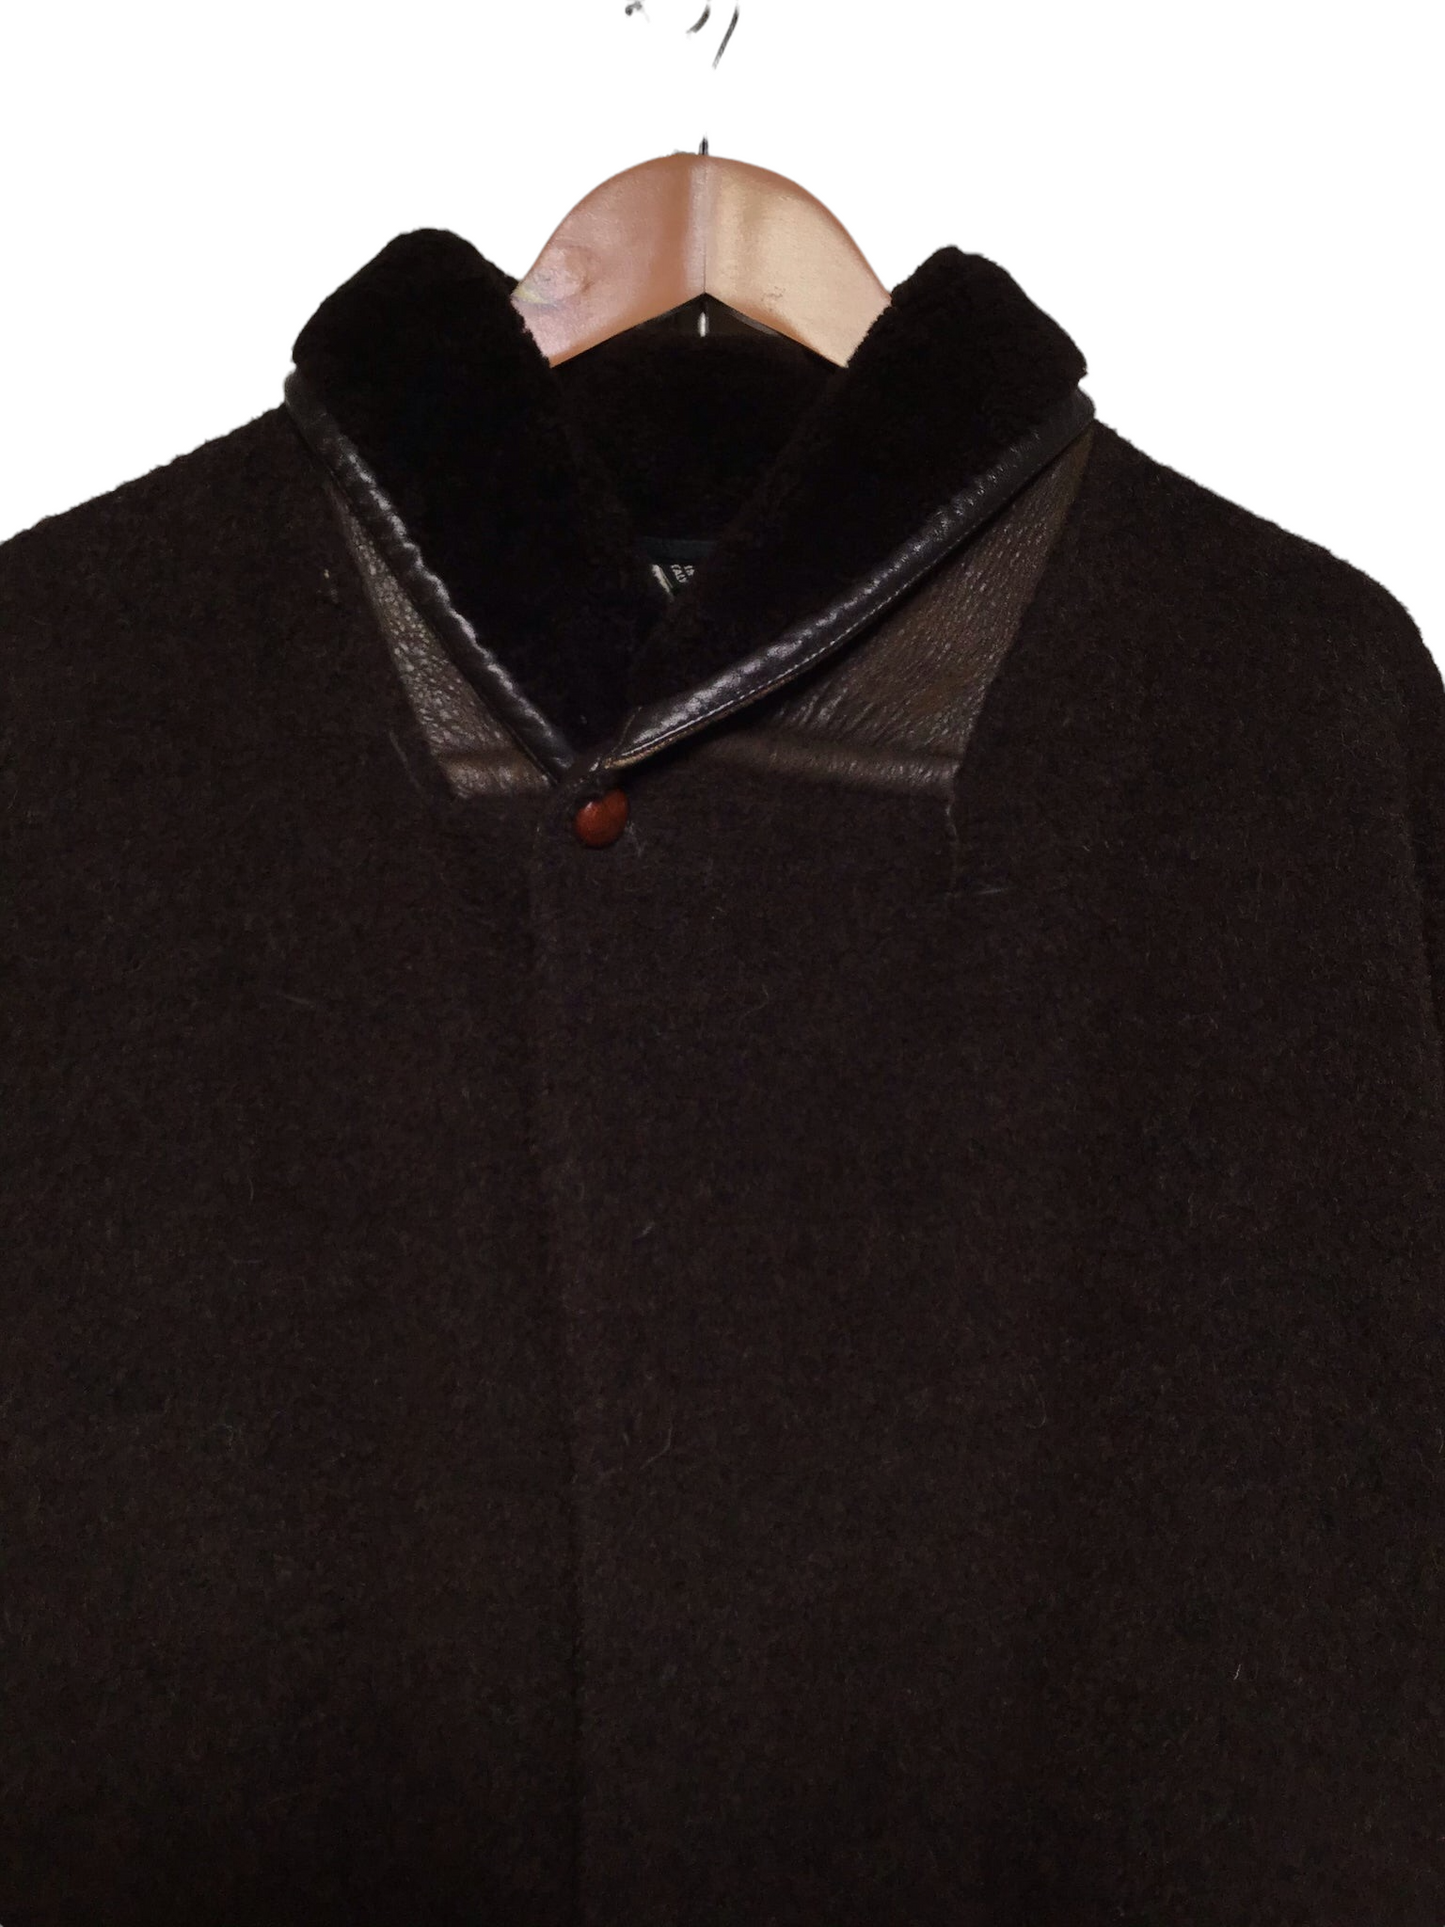 Vintage Teddy Coat with Shearling Collar (Size L)